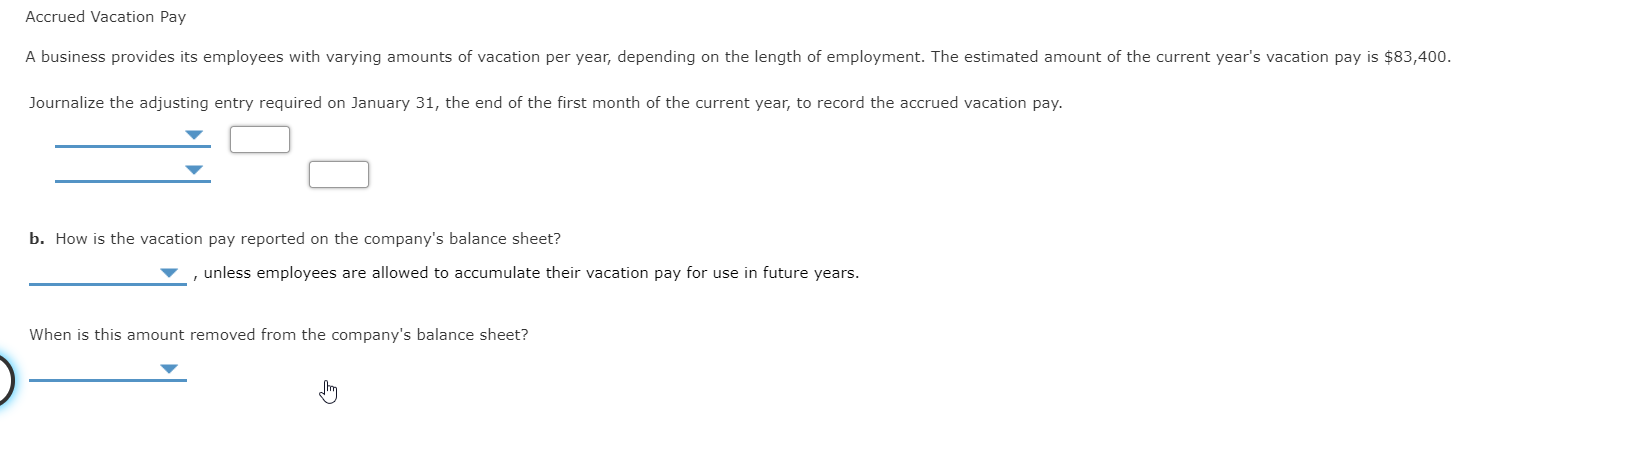 Accrued Vacation Pay
A business provides its employees with varying amounts of vacation per year, depending on the length of employment. The estimated amount of the current year's vacation pay is $83,400.
Journalize the adjusting entry required on January 31, the end of the first month of the current year, to record the accrued vacation pay.
b. How is the vacation pay reported on the company's balance sheet?
unless employees are allowed to accumulate their vacation pay for use in future years.
When is this amount removed from the company's balance sheet?
